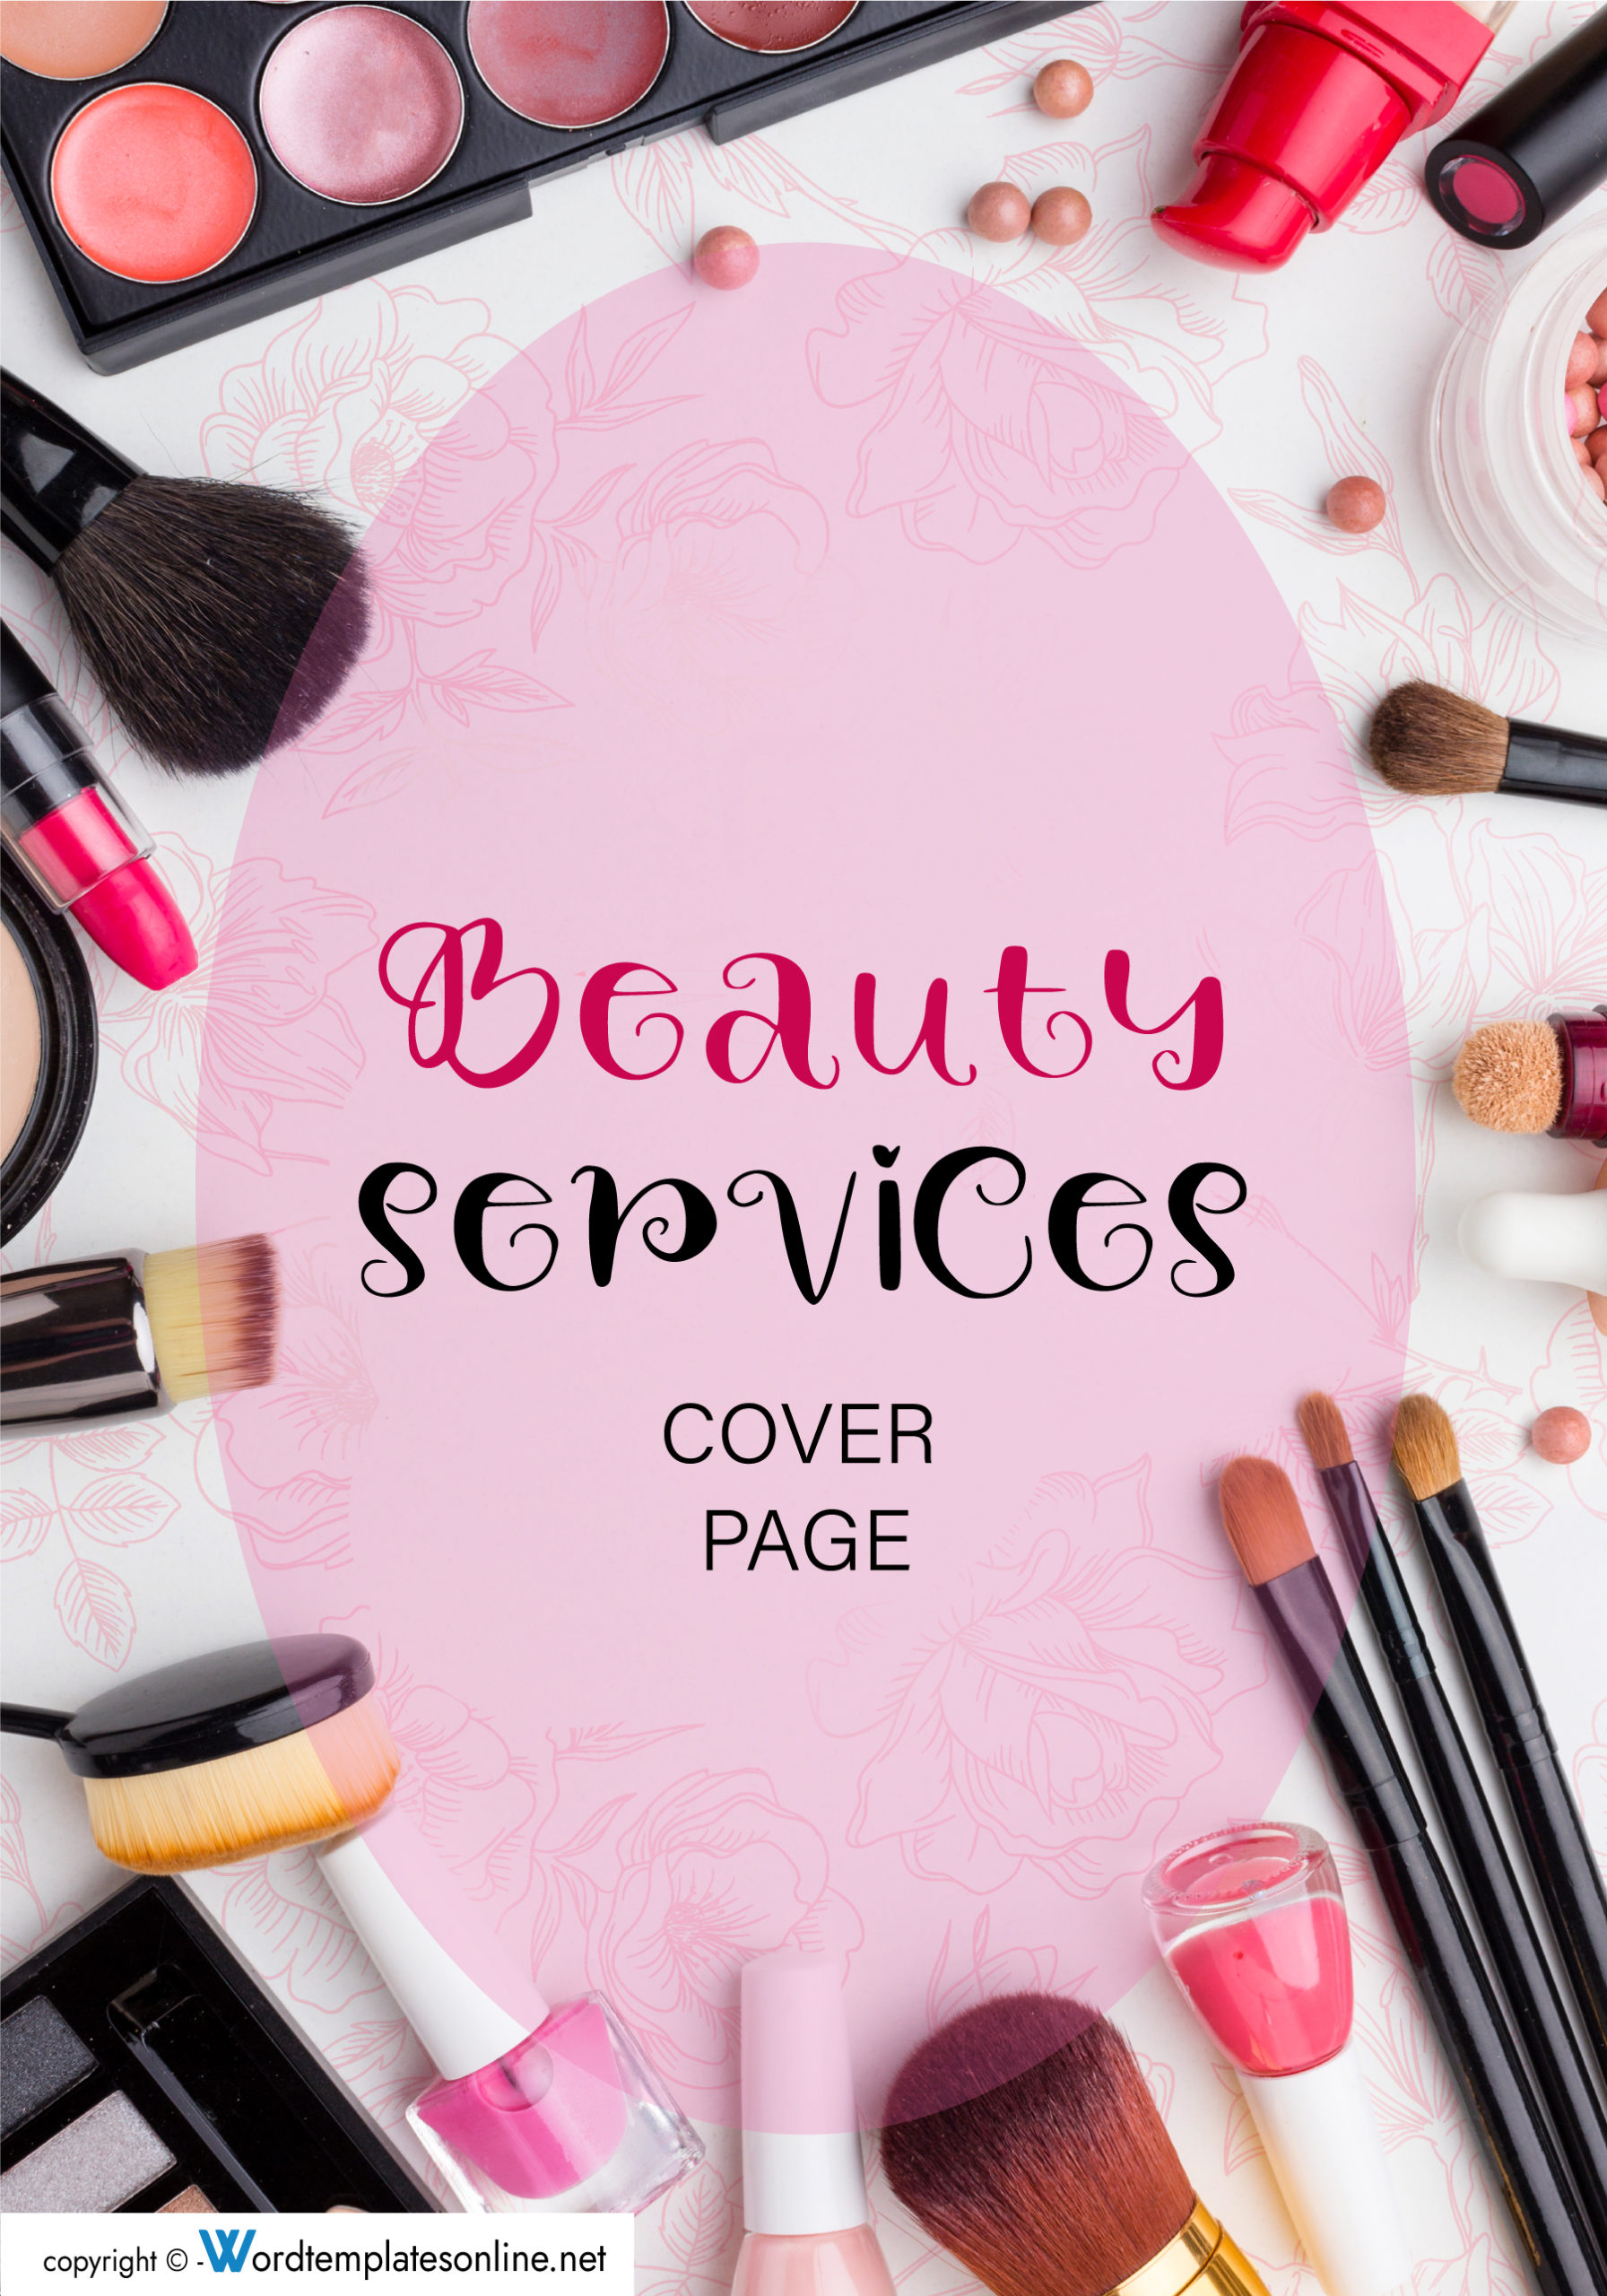 Beauty Services cover sample free